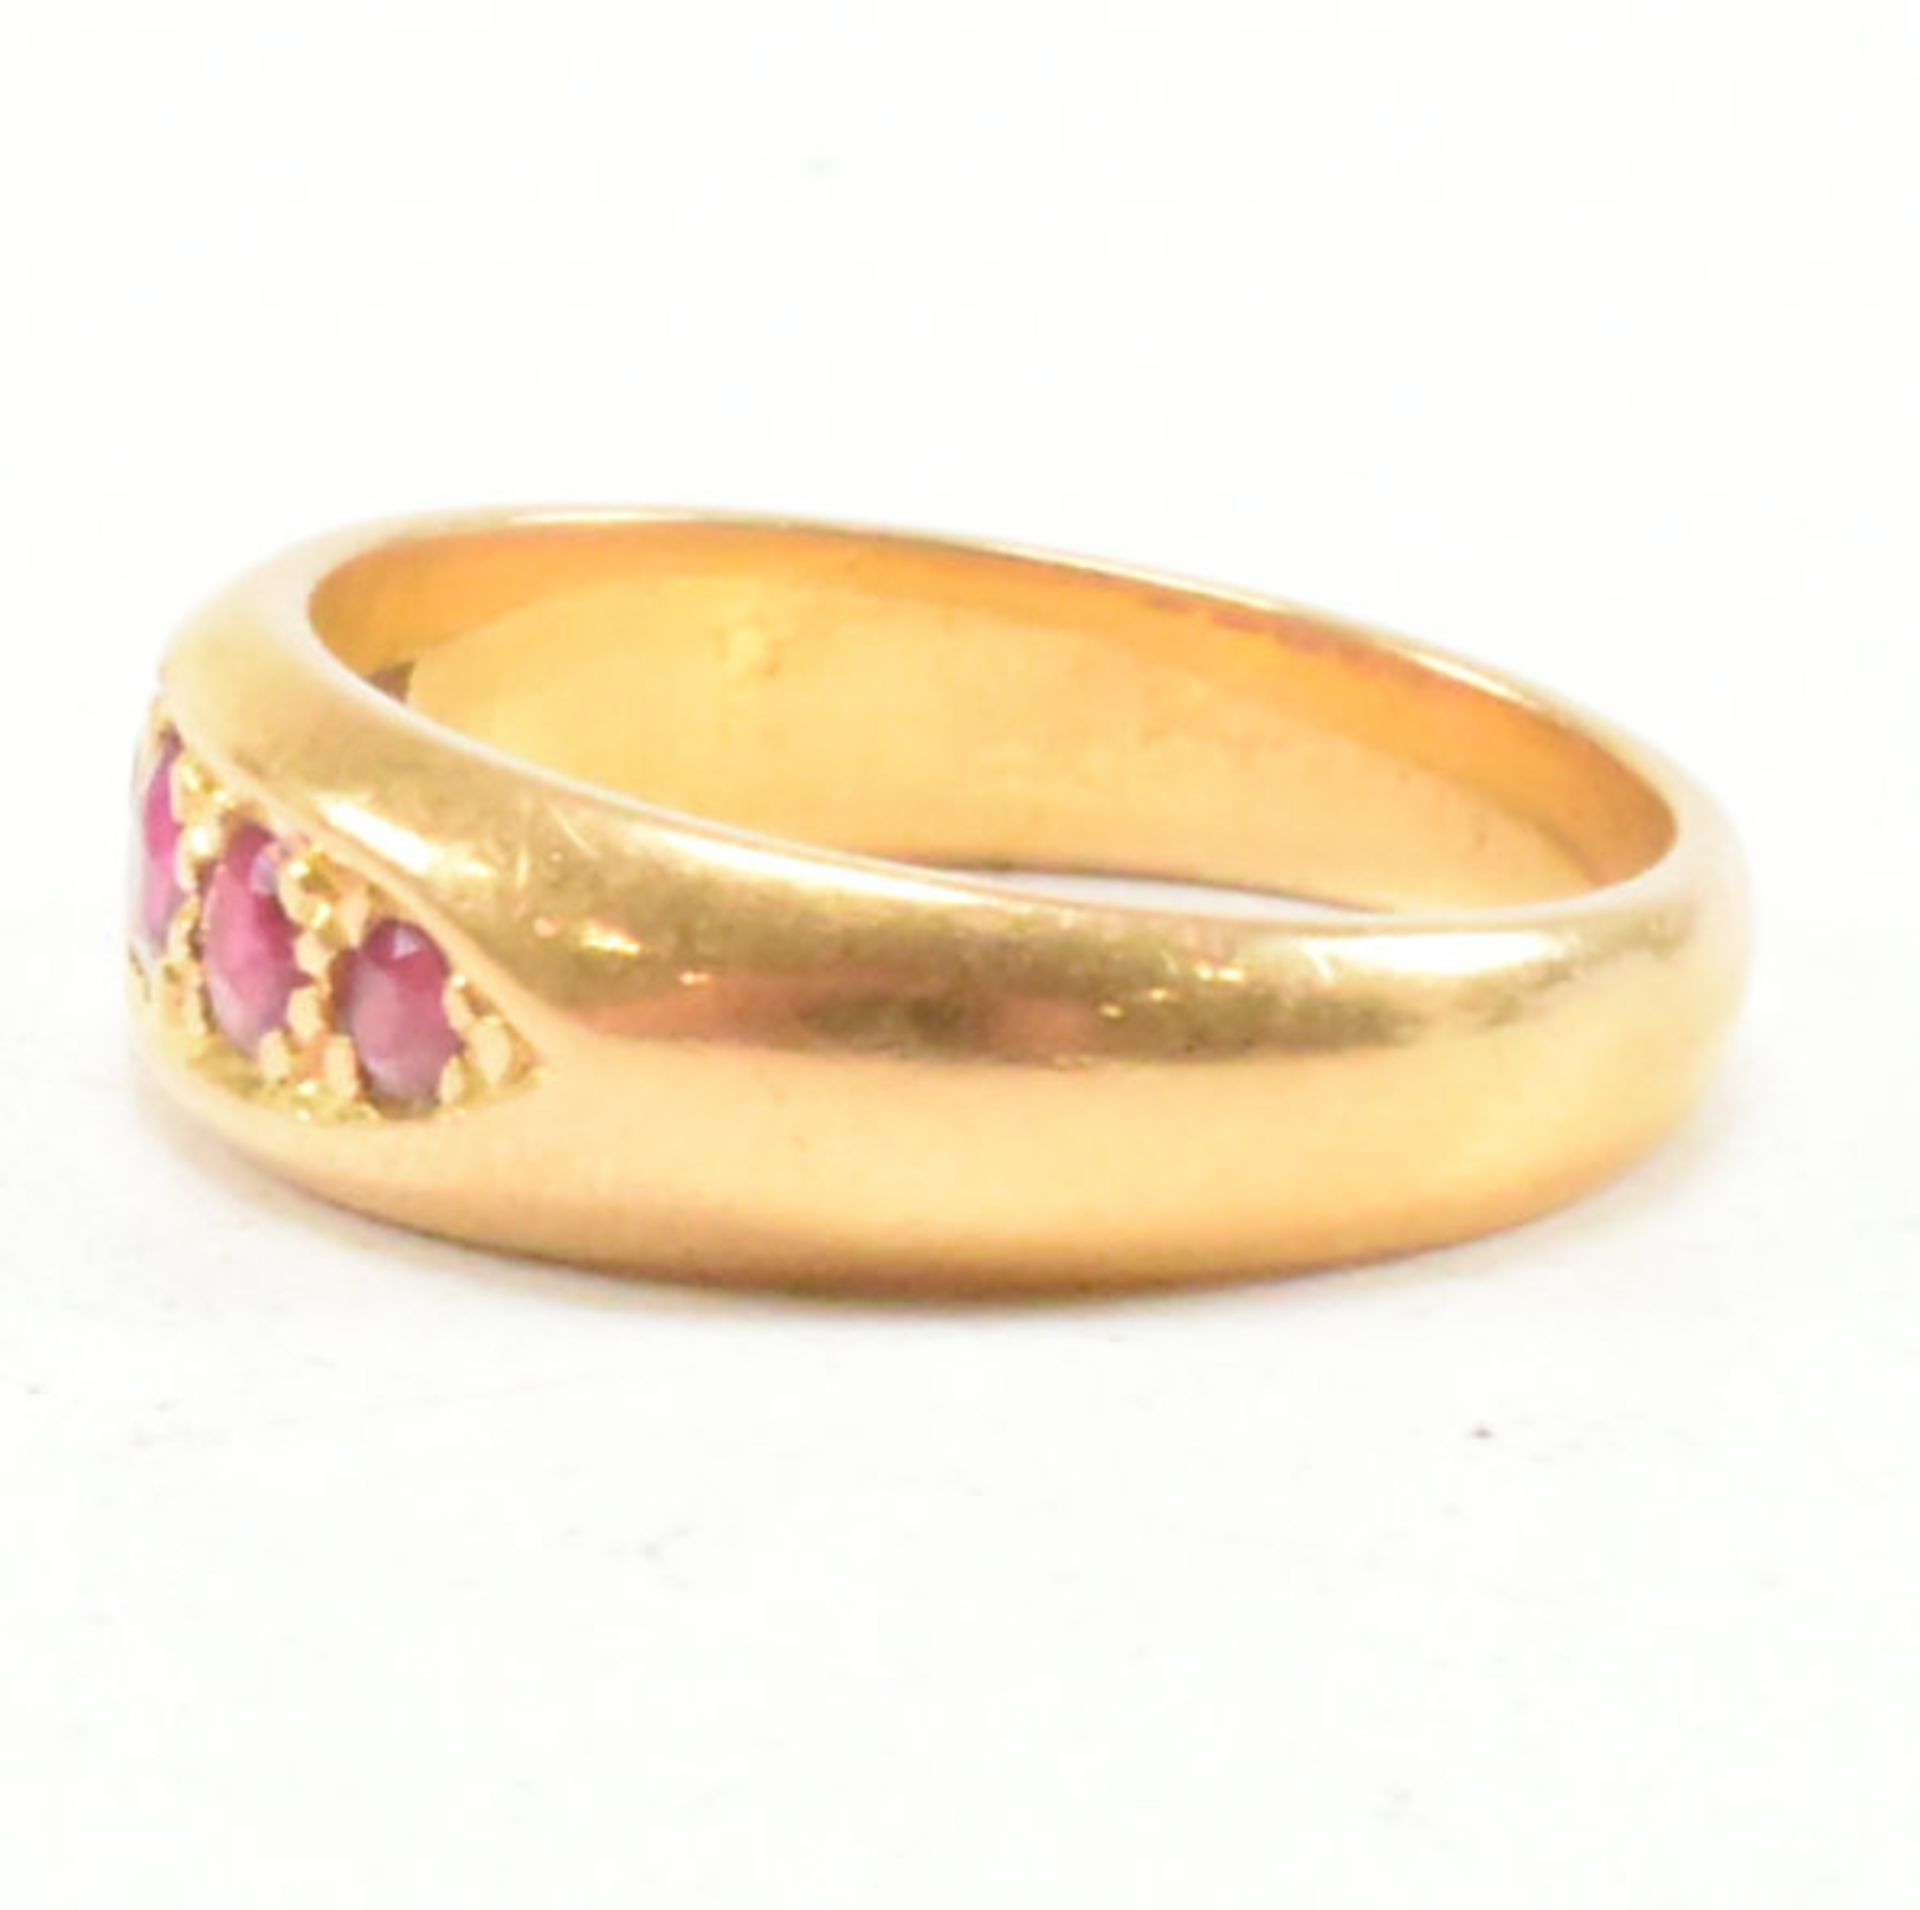 GOLD & RUBY FIVE STONE RING - Image 3 of 7